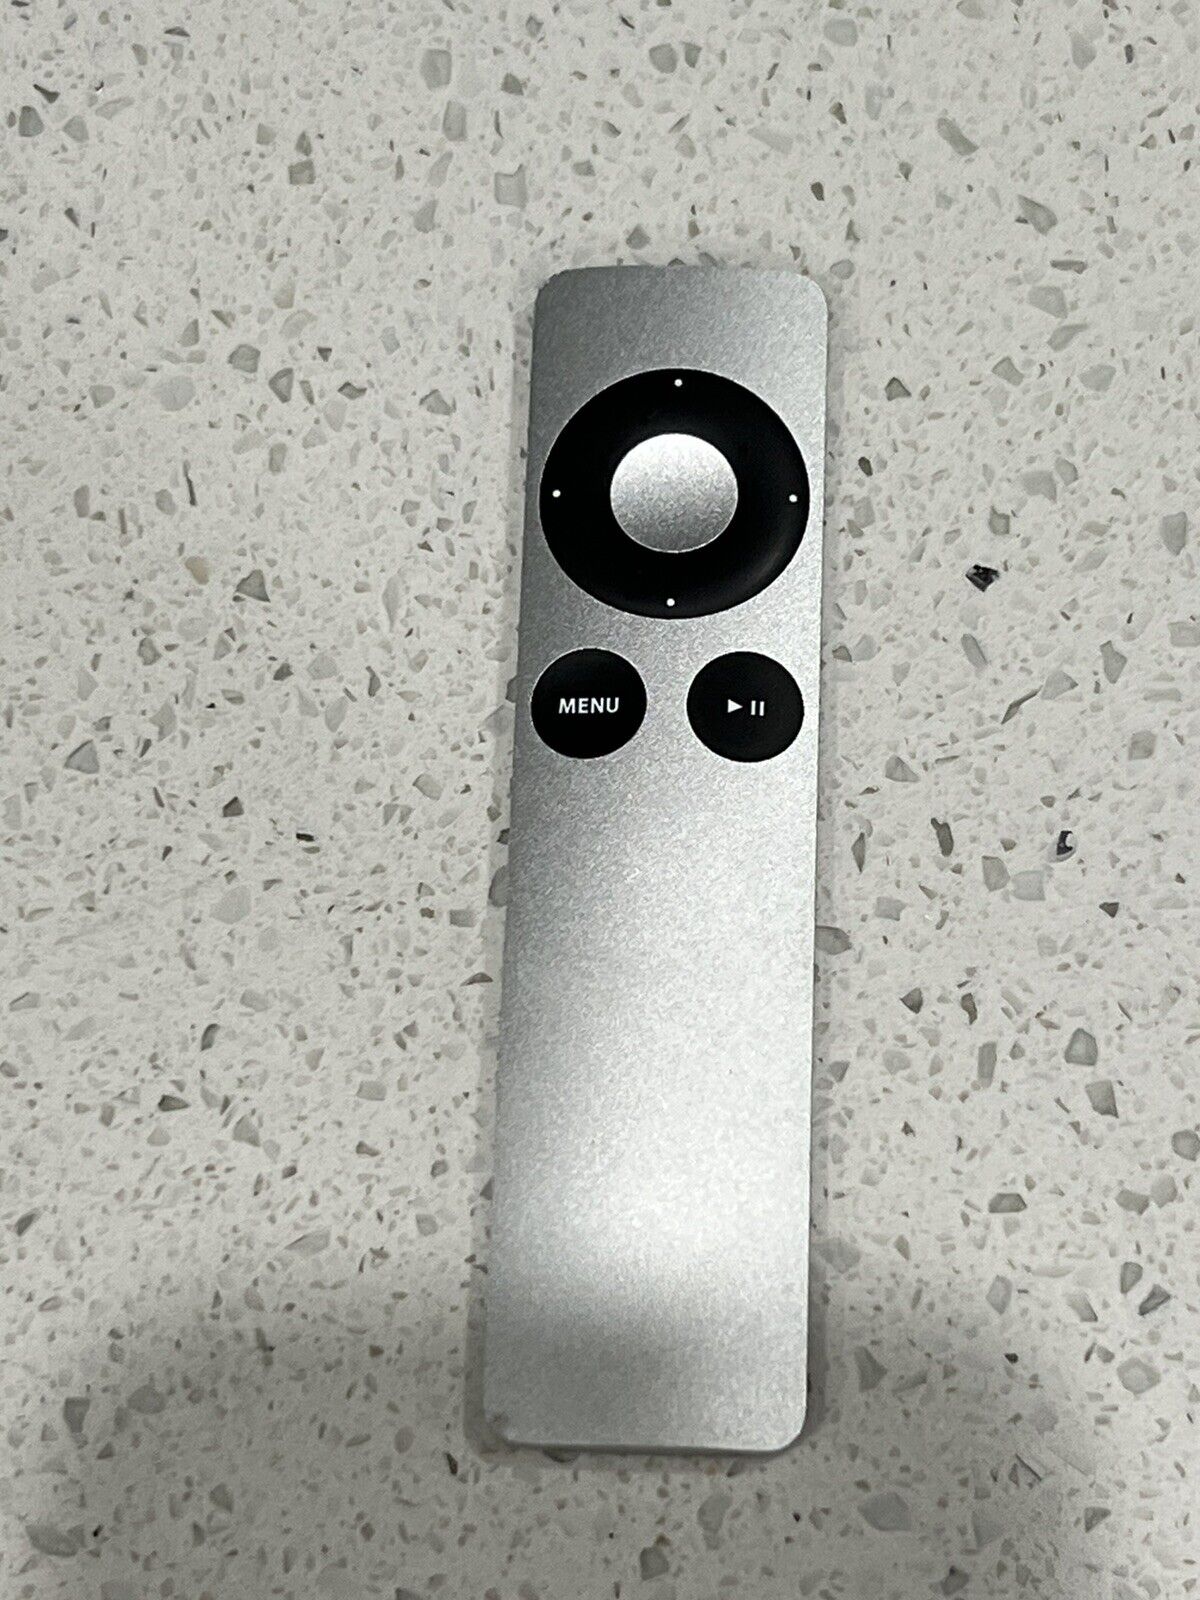 ORIGINAL APPLE REMOTE CONTROL A1294..COMPUTER..APPLE TV..OTHER..FRESH BATTERY